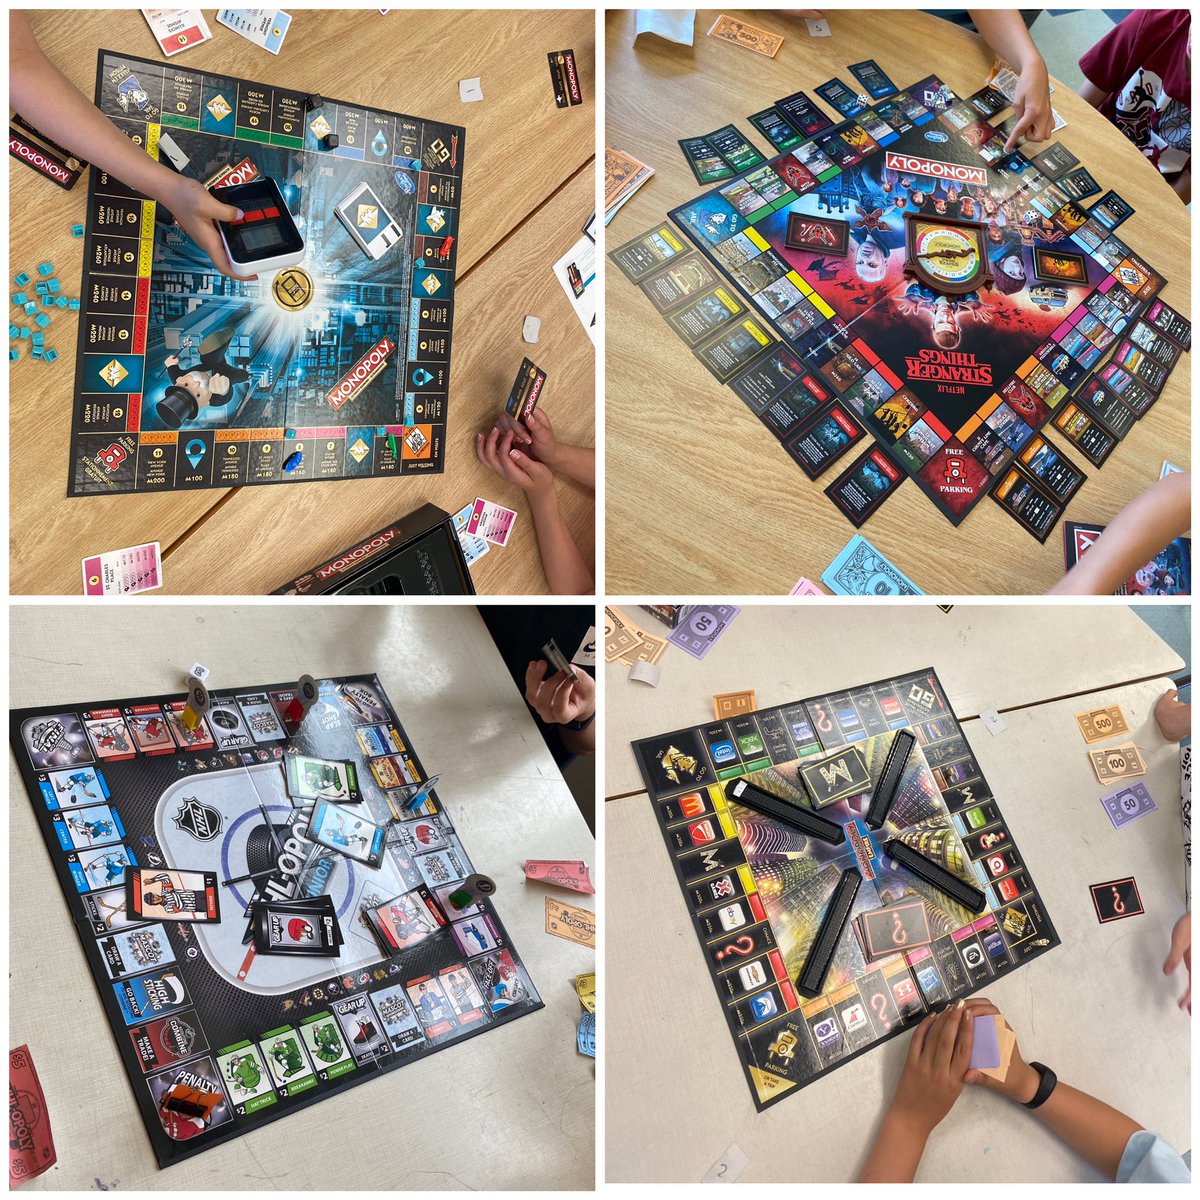 Ended our financial literacy unit by playing different versions of Monopoly! Students bought and sold properties with cash and even credit cards! @Hasbro which version should we try next? 🎲